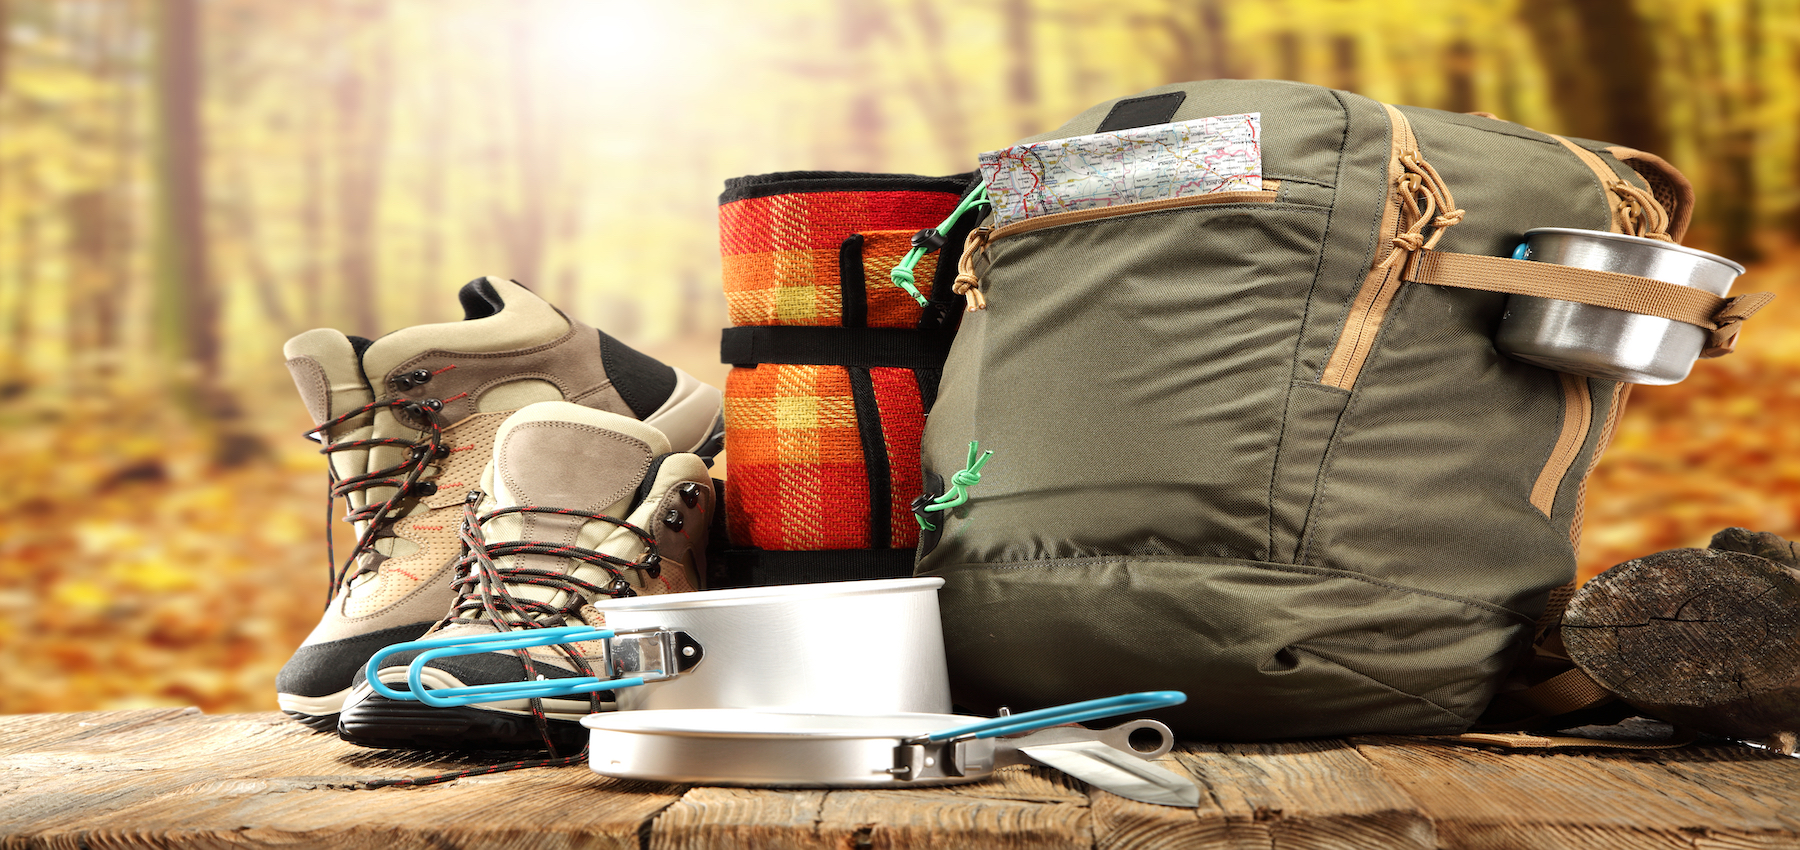 12 essentials to bring when camping